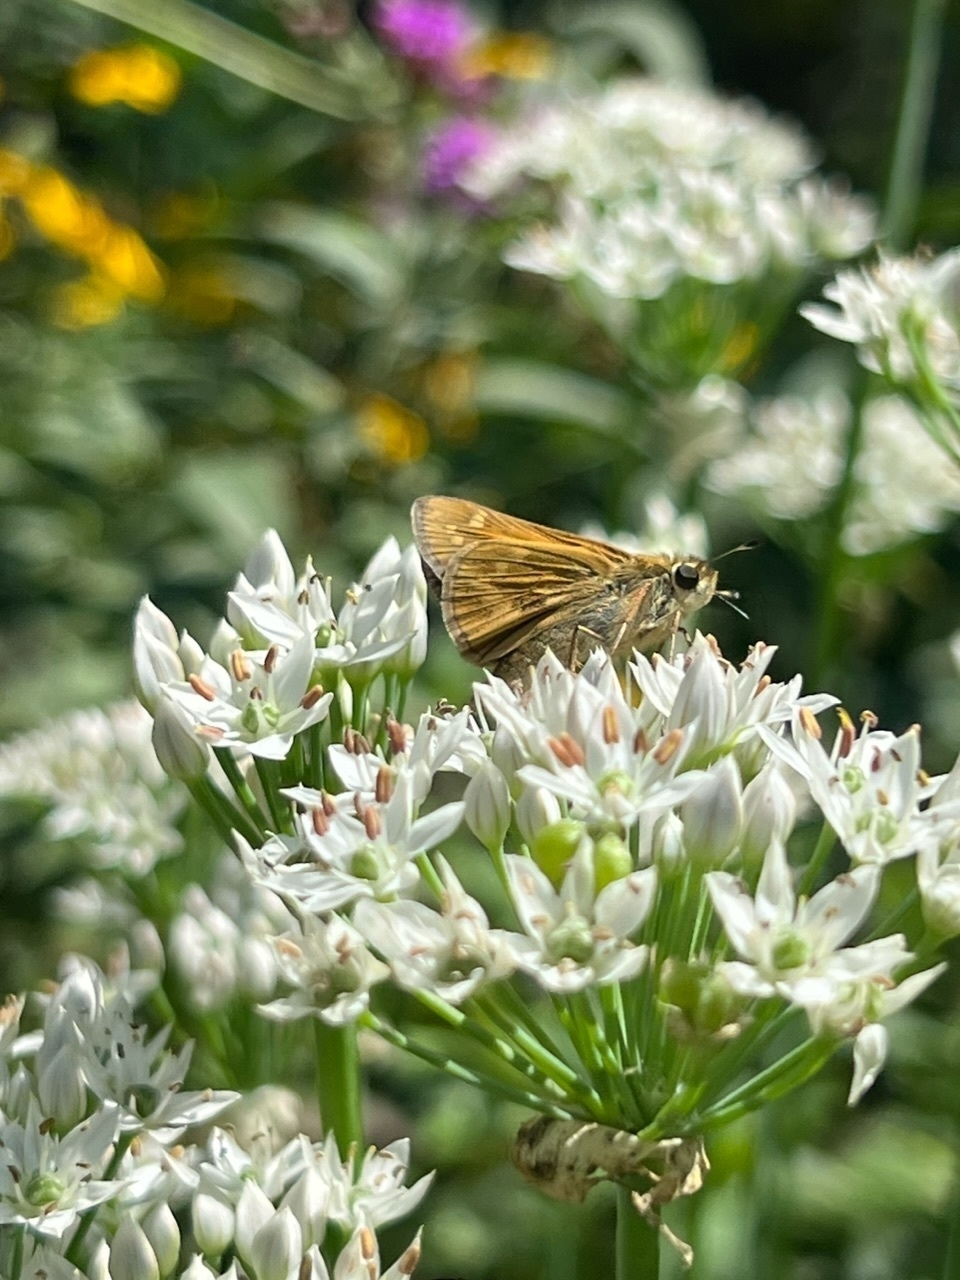 A butterfly feeds from white clusters of small flowers. Yellow and purple flowers in the background.